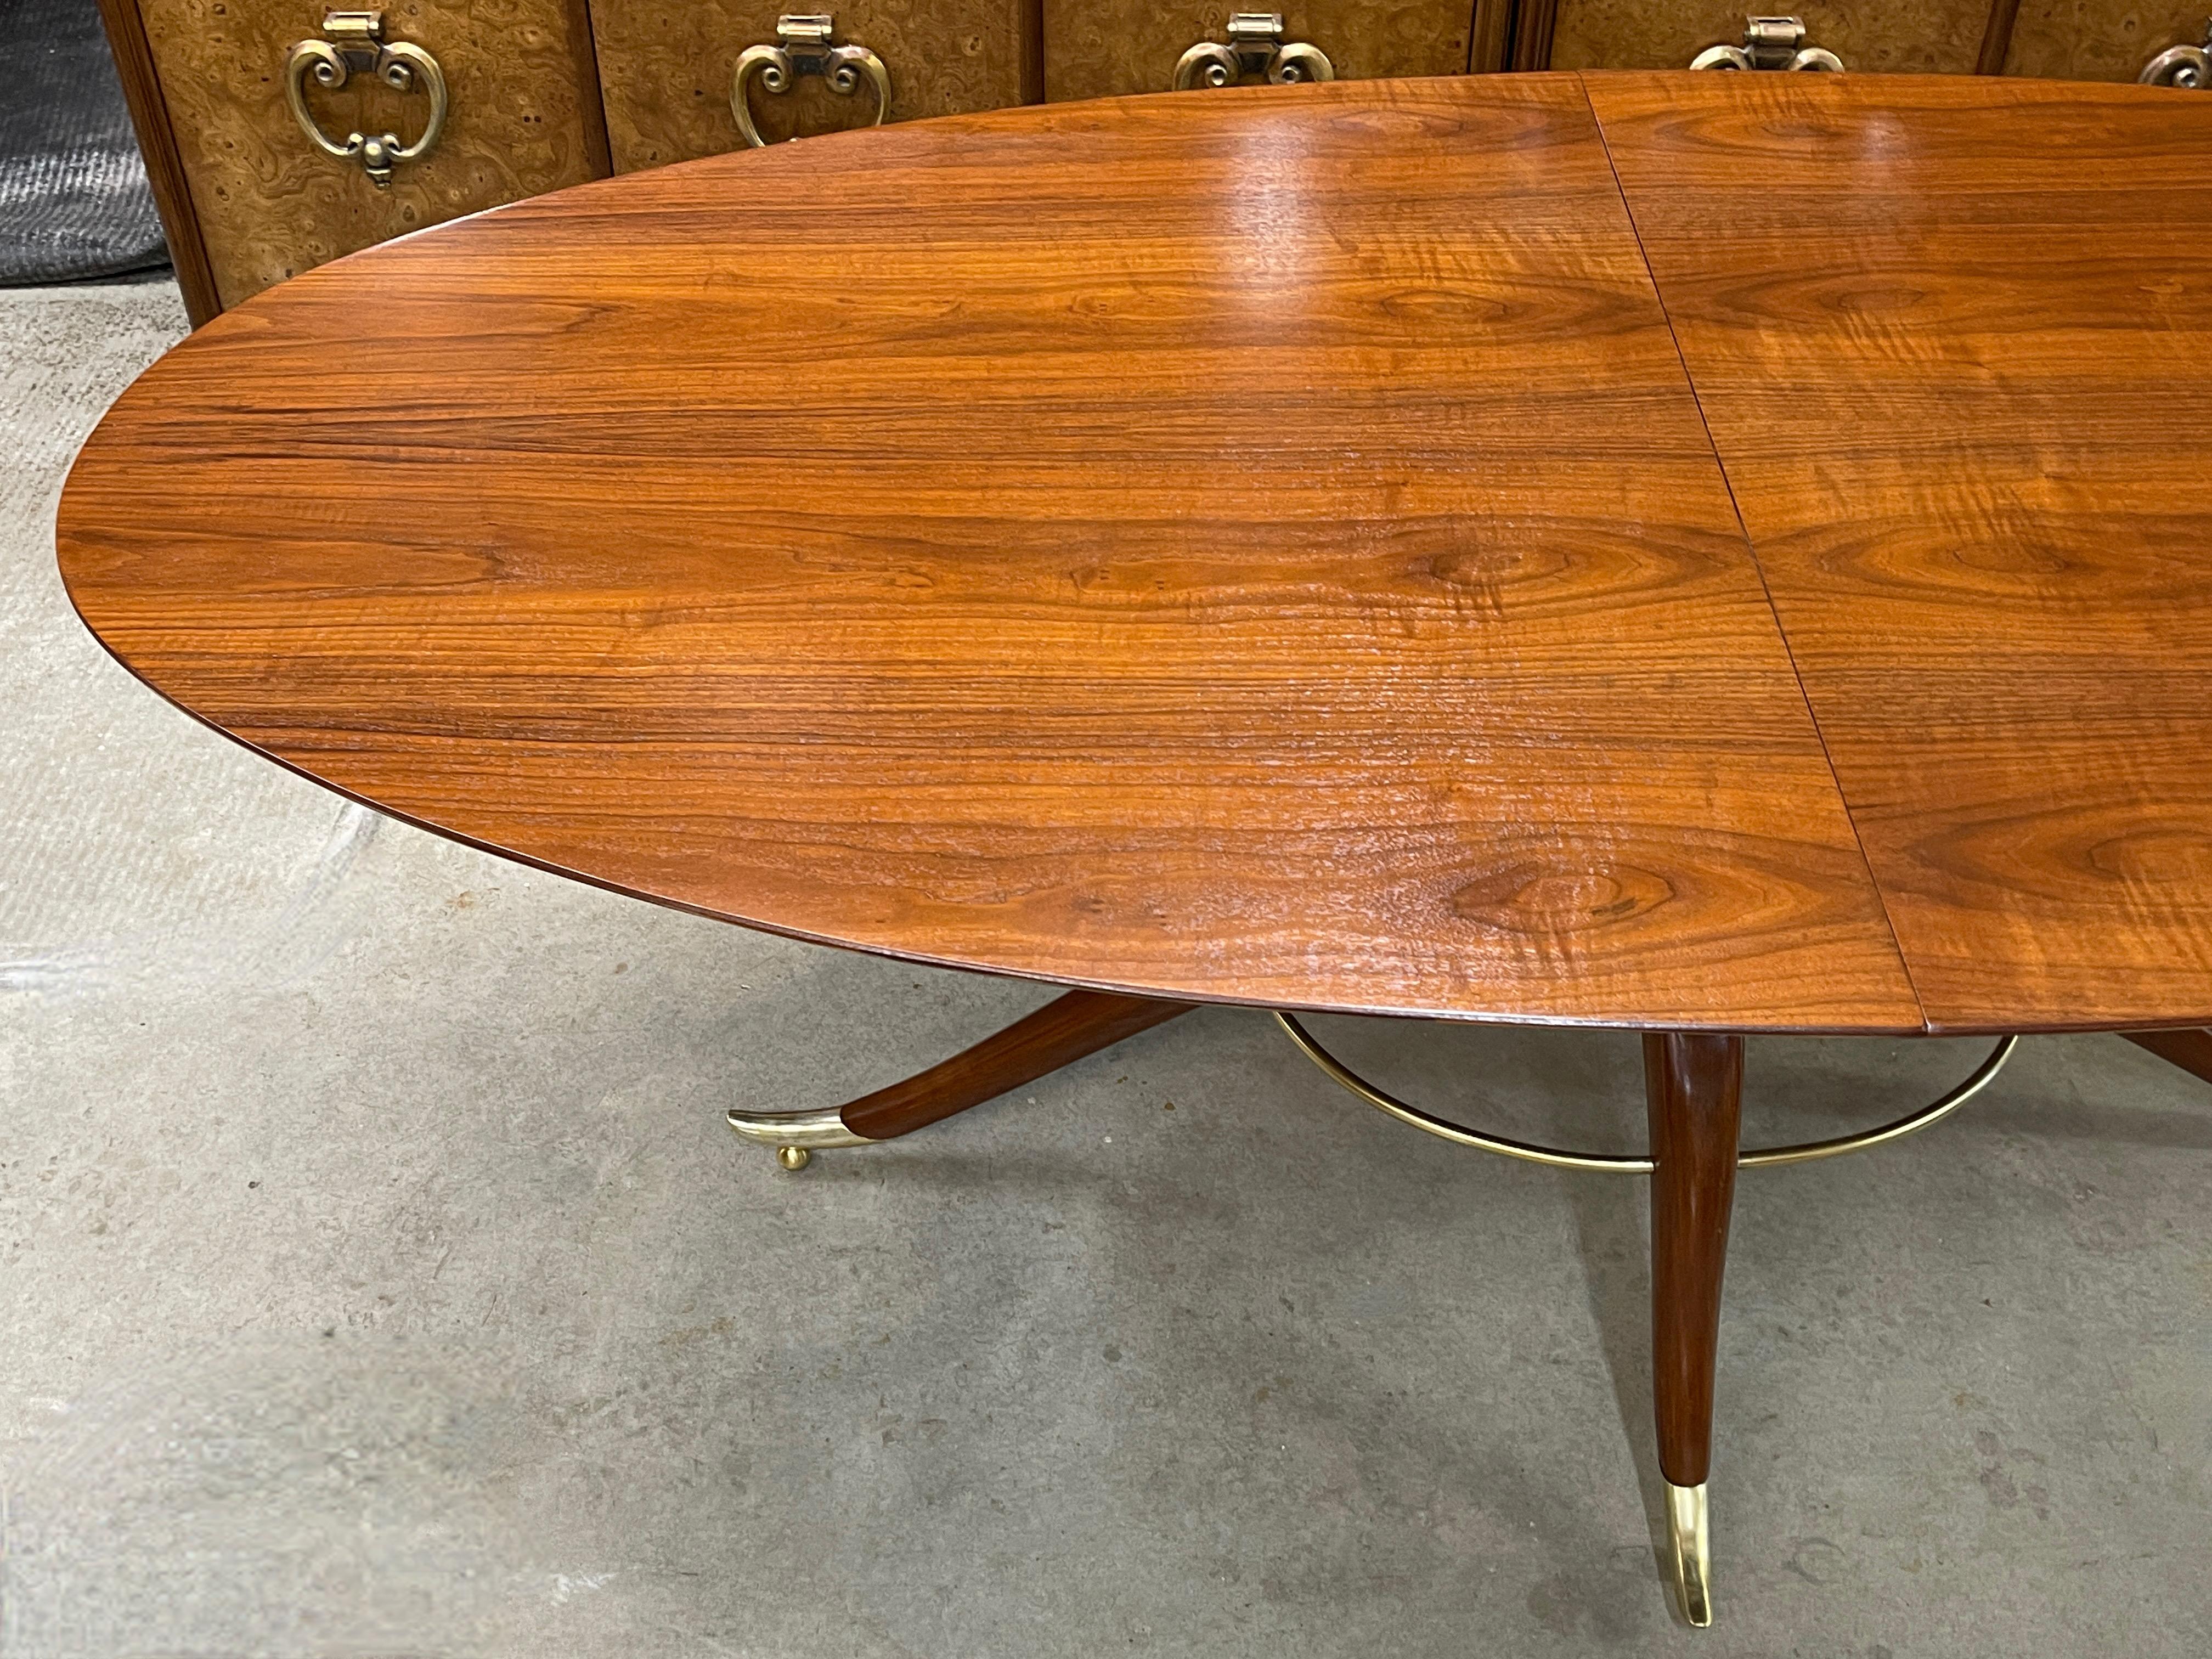 American Elliptical Oval Dining Table by Adolfo Genovese for F&G Handmade Furniture